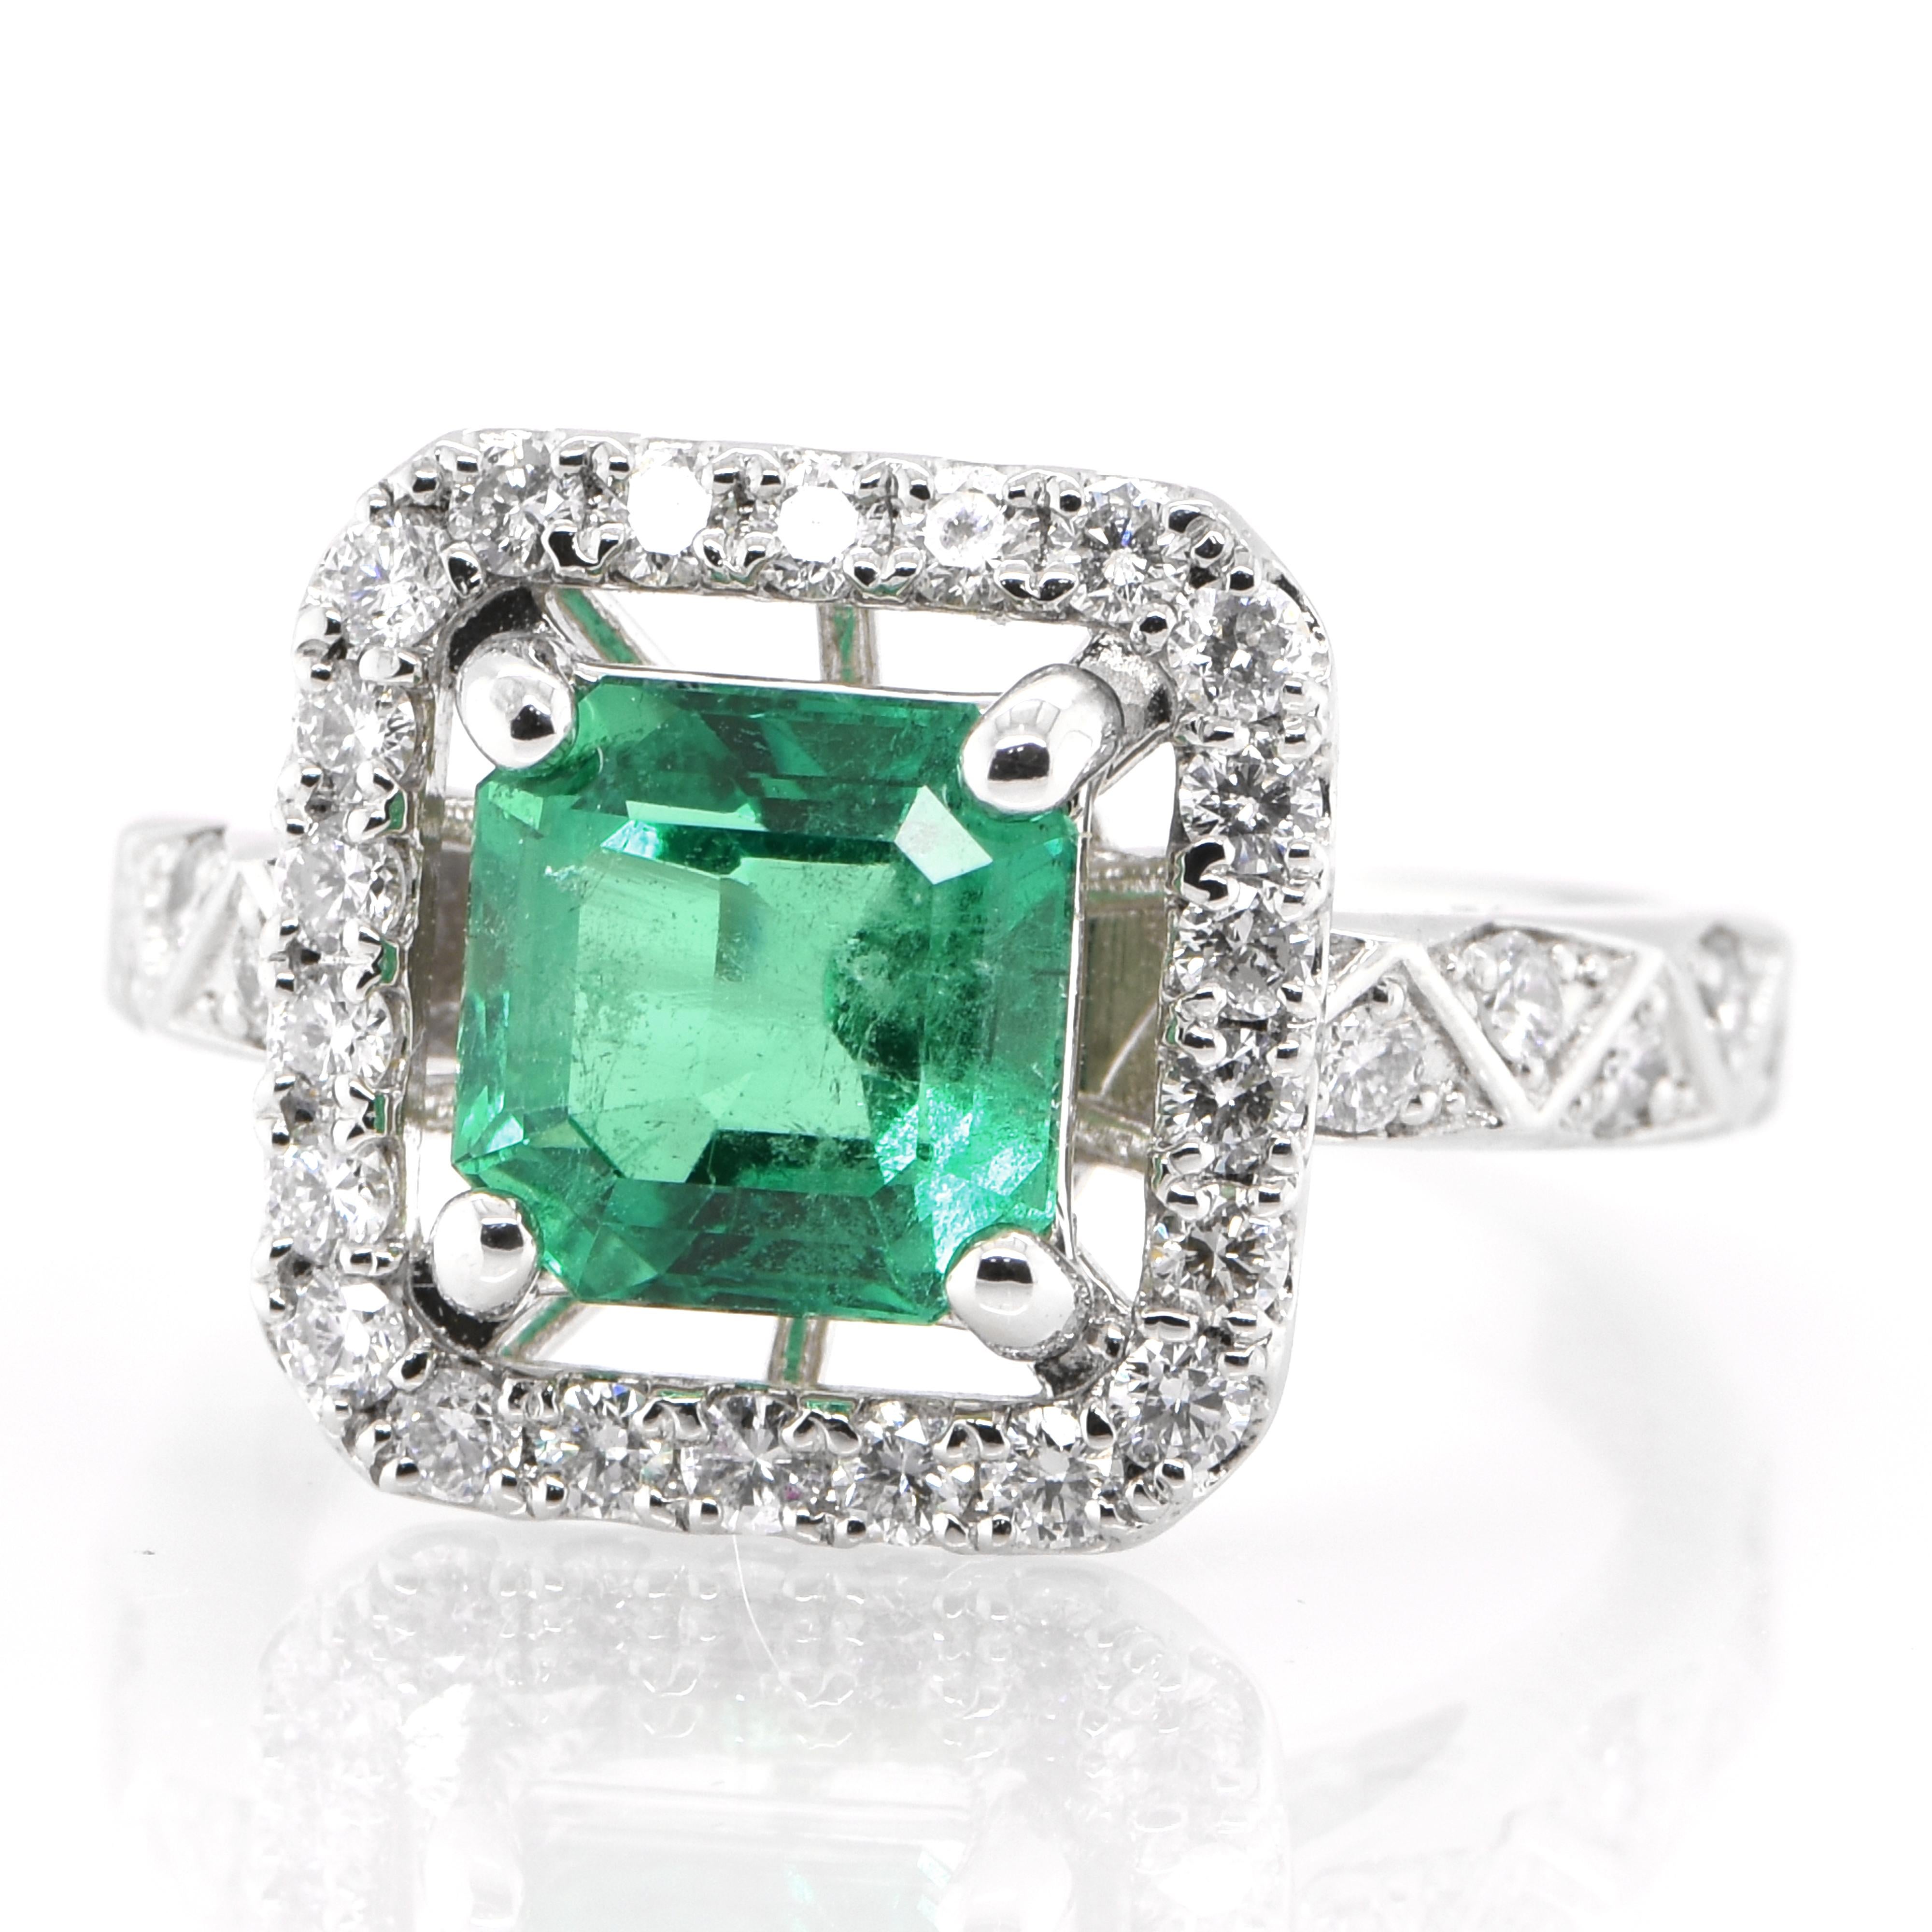 A stunning engagement ring featuring a 1.69 Carat Natural Emerald and 0.52 Carats of Diamond Accents set in Platinum. People have admired emerald’s green for thousands of years. Emeralds have always been associated with the lushest landscapes and